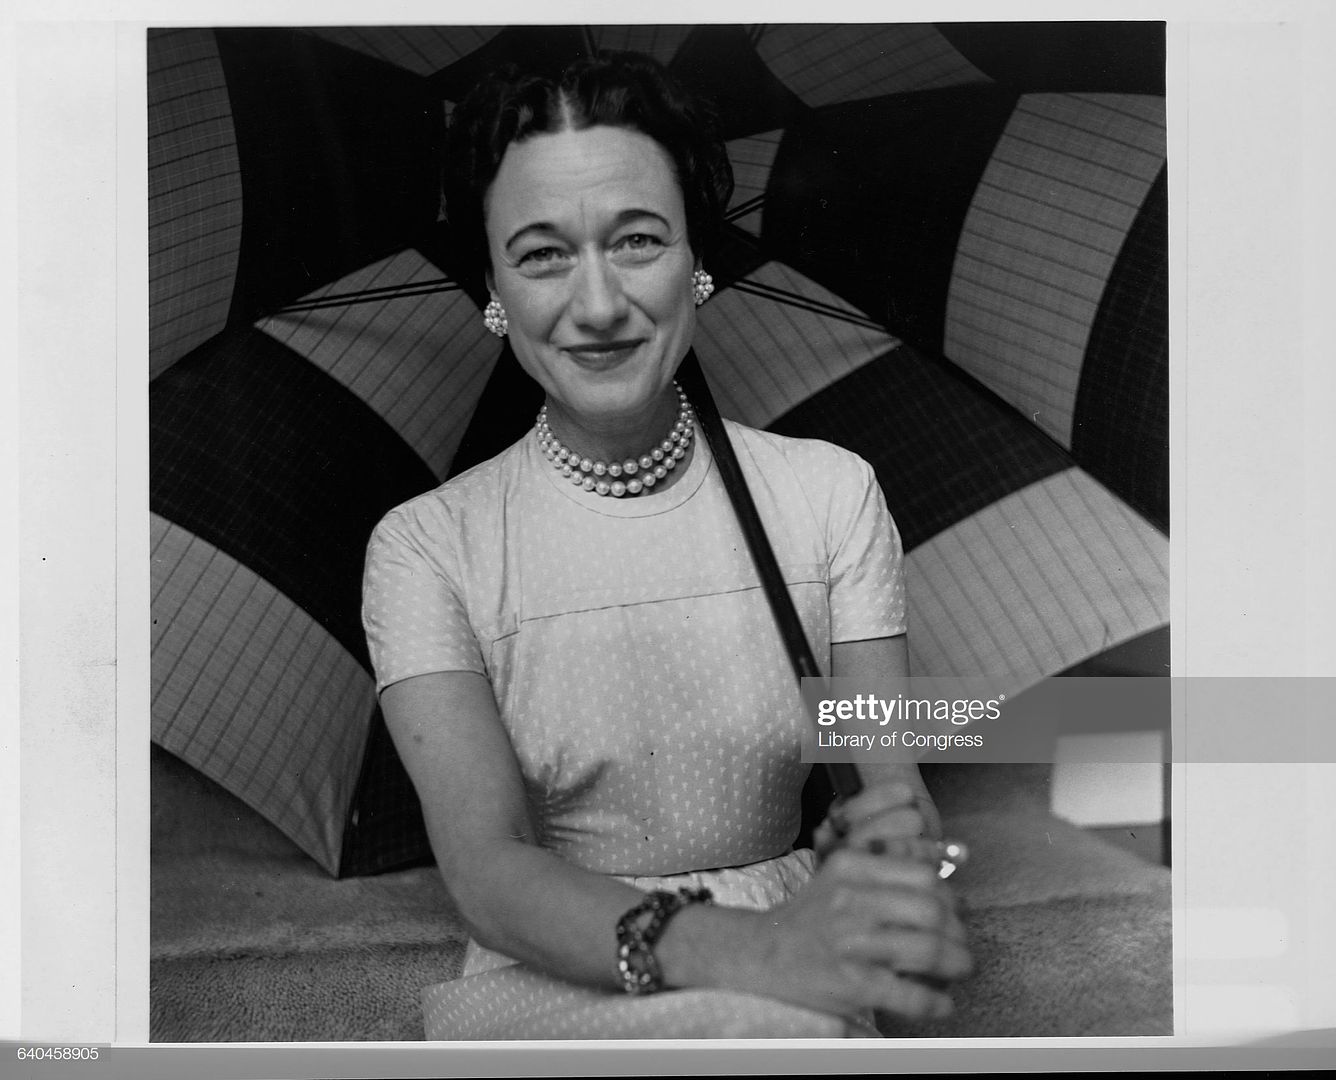 1950 1 Jan gettyimages-640458905-2048x2048(1)